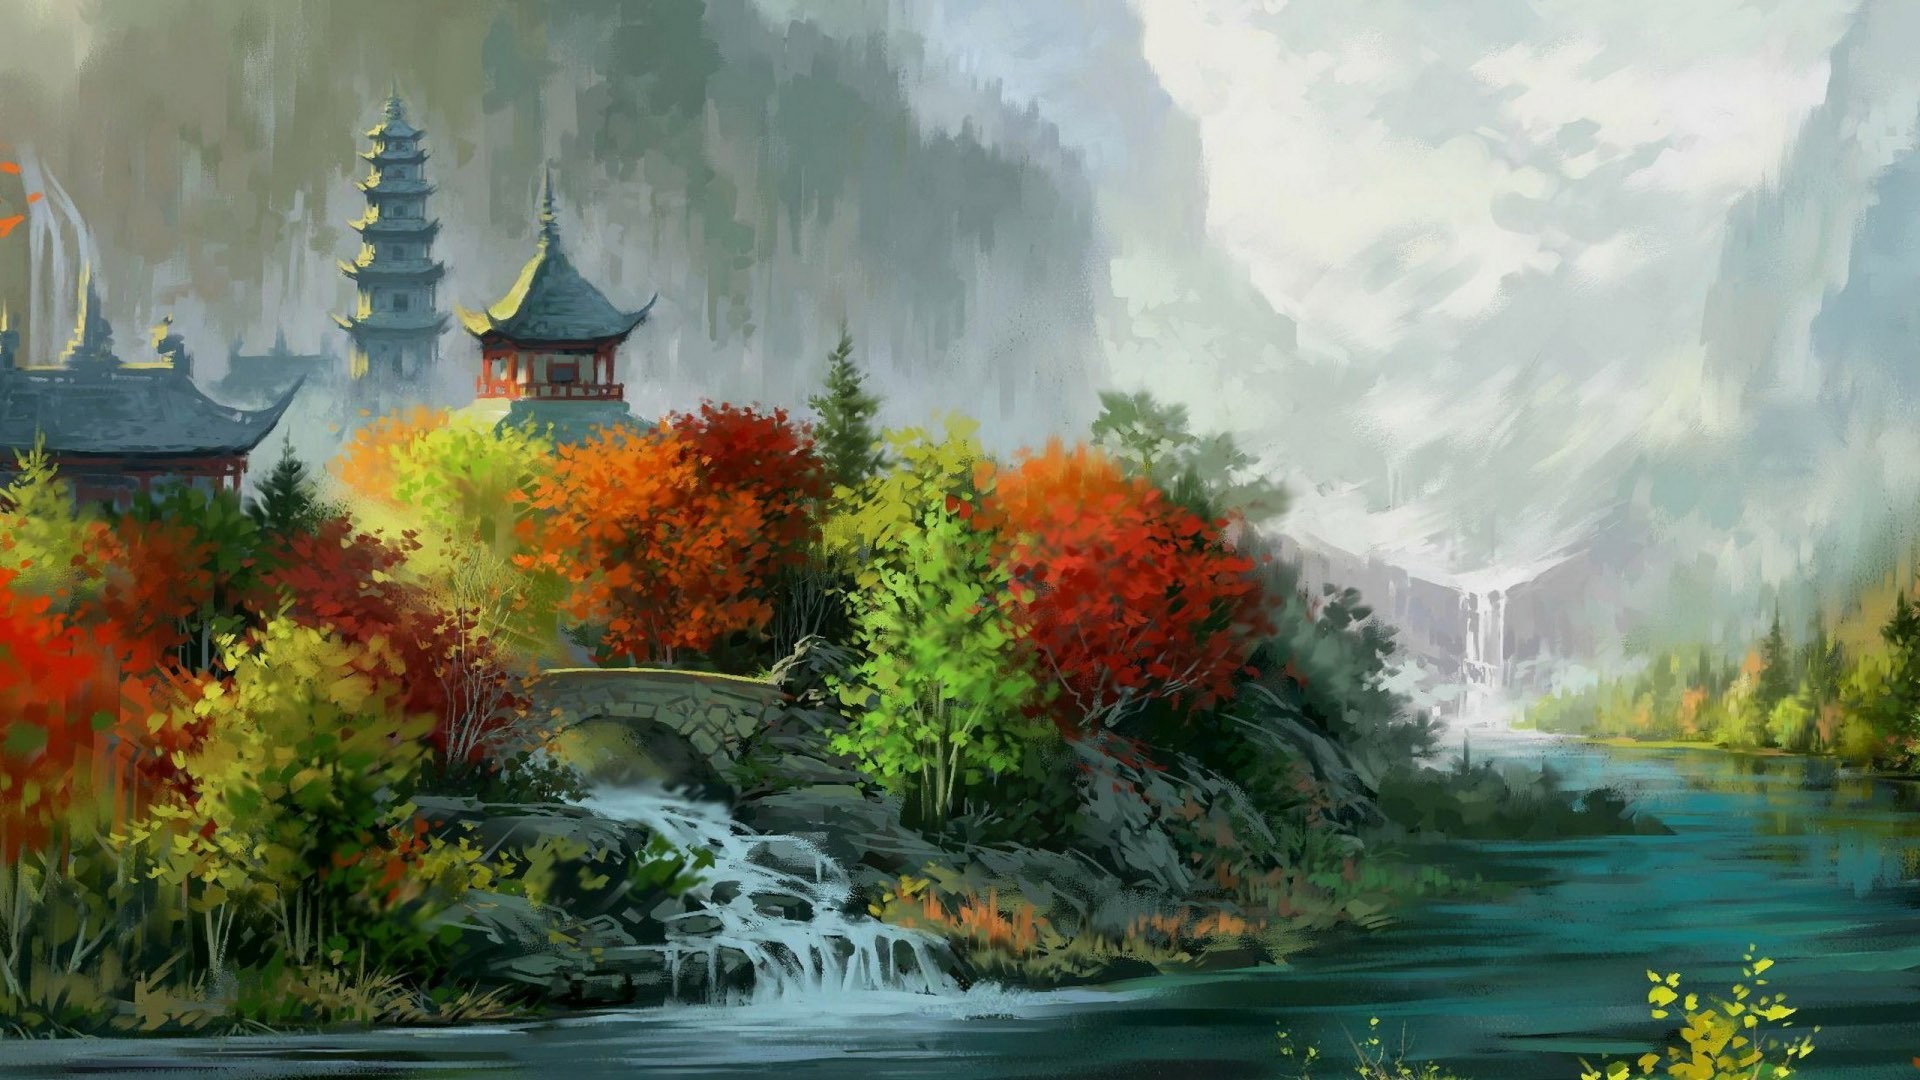 1920x1080 artwork painting digital art asian architecture house tower nature landscape river bridge waterfall trees forest valley mountain fall leaves wallpaper JPG 385 kB. Mocah HD Wallpaper